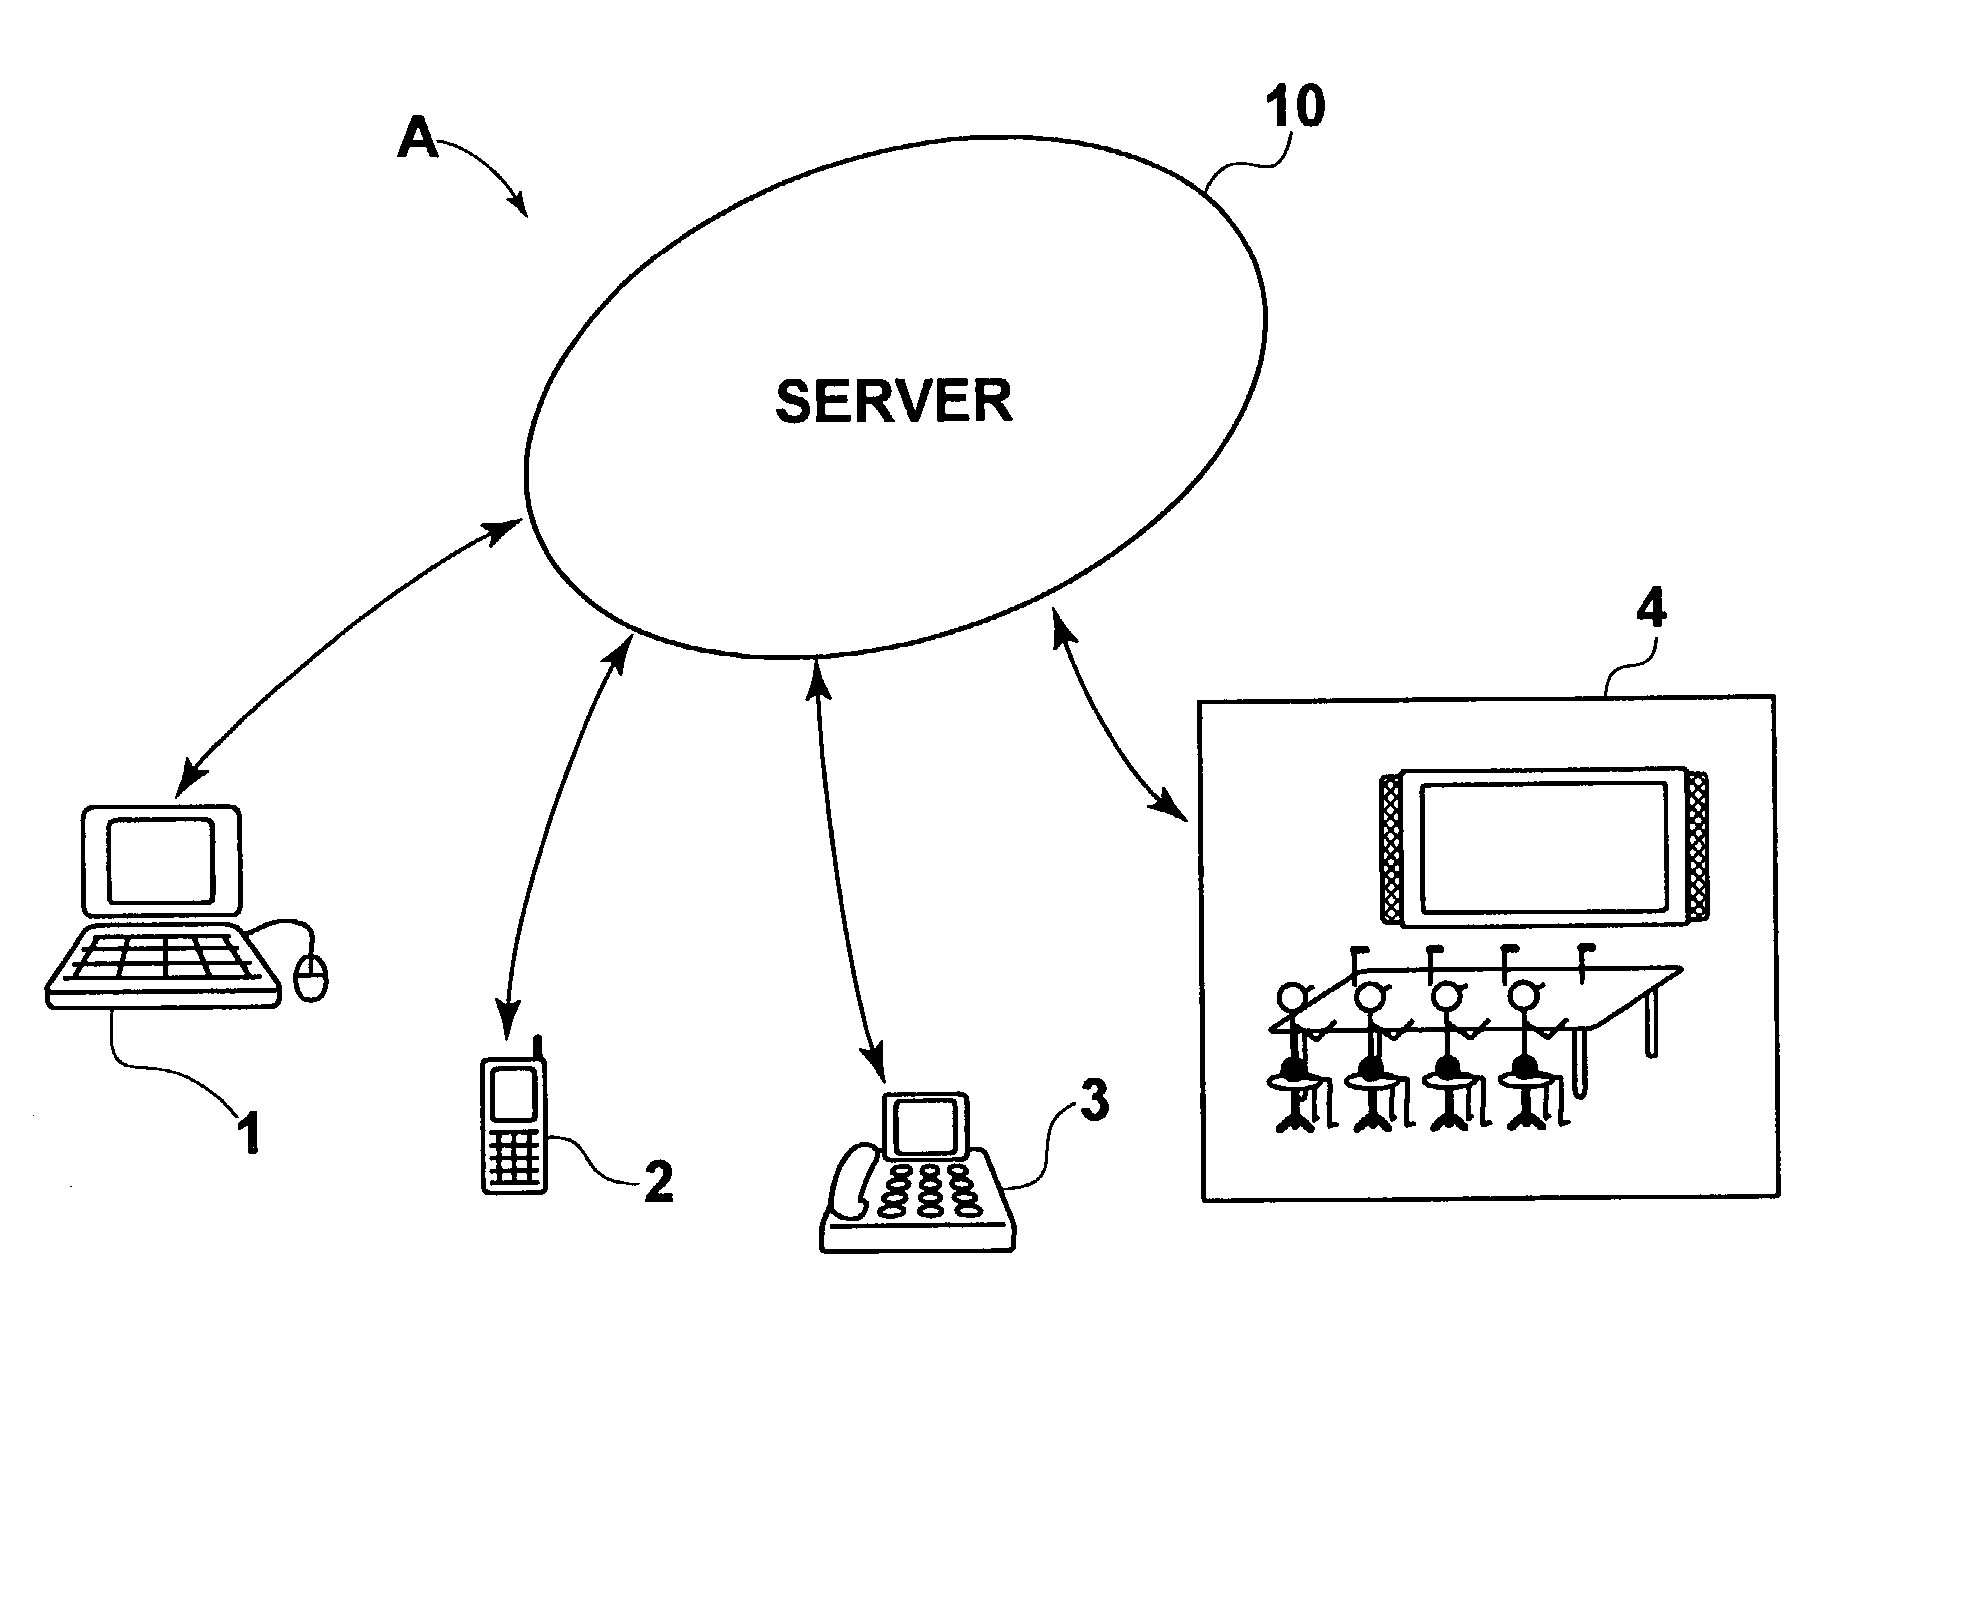 Teleconferencing server and teleconferencing system